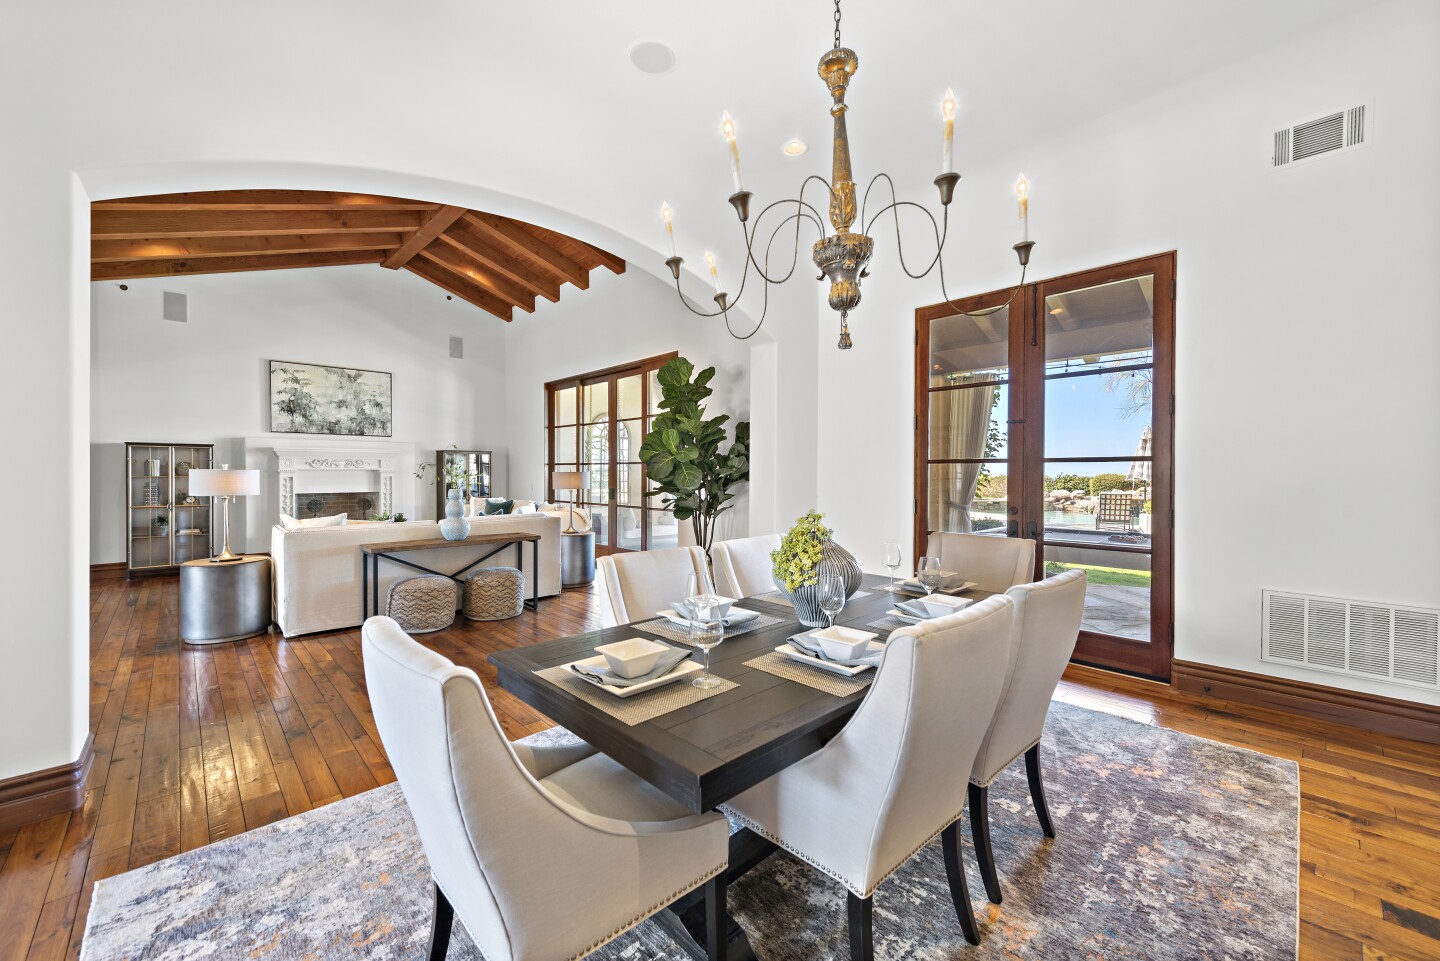 Philip Rivers' San Diego home | Hot Property - Los Angeles Times